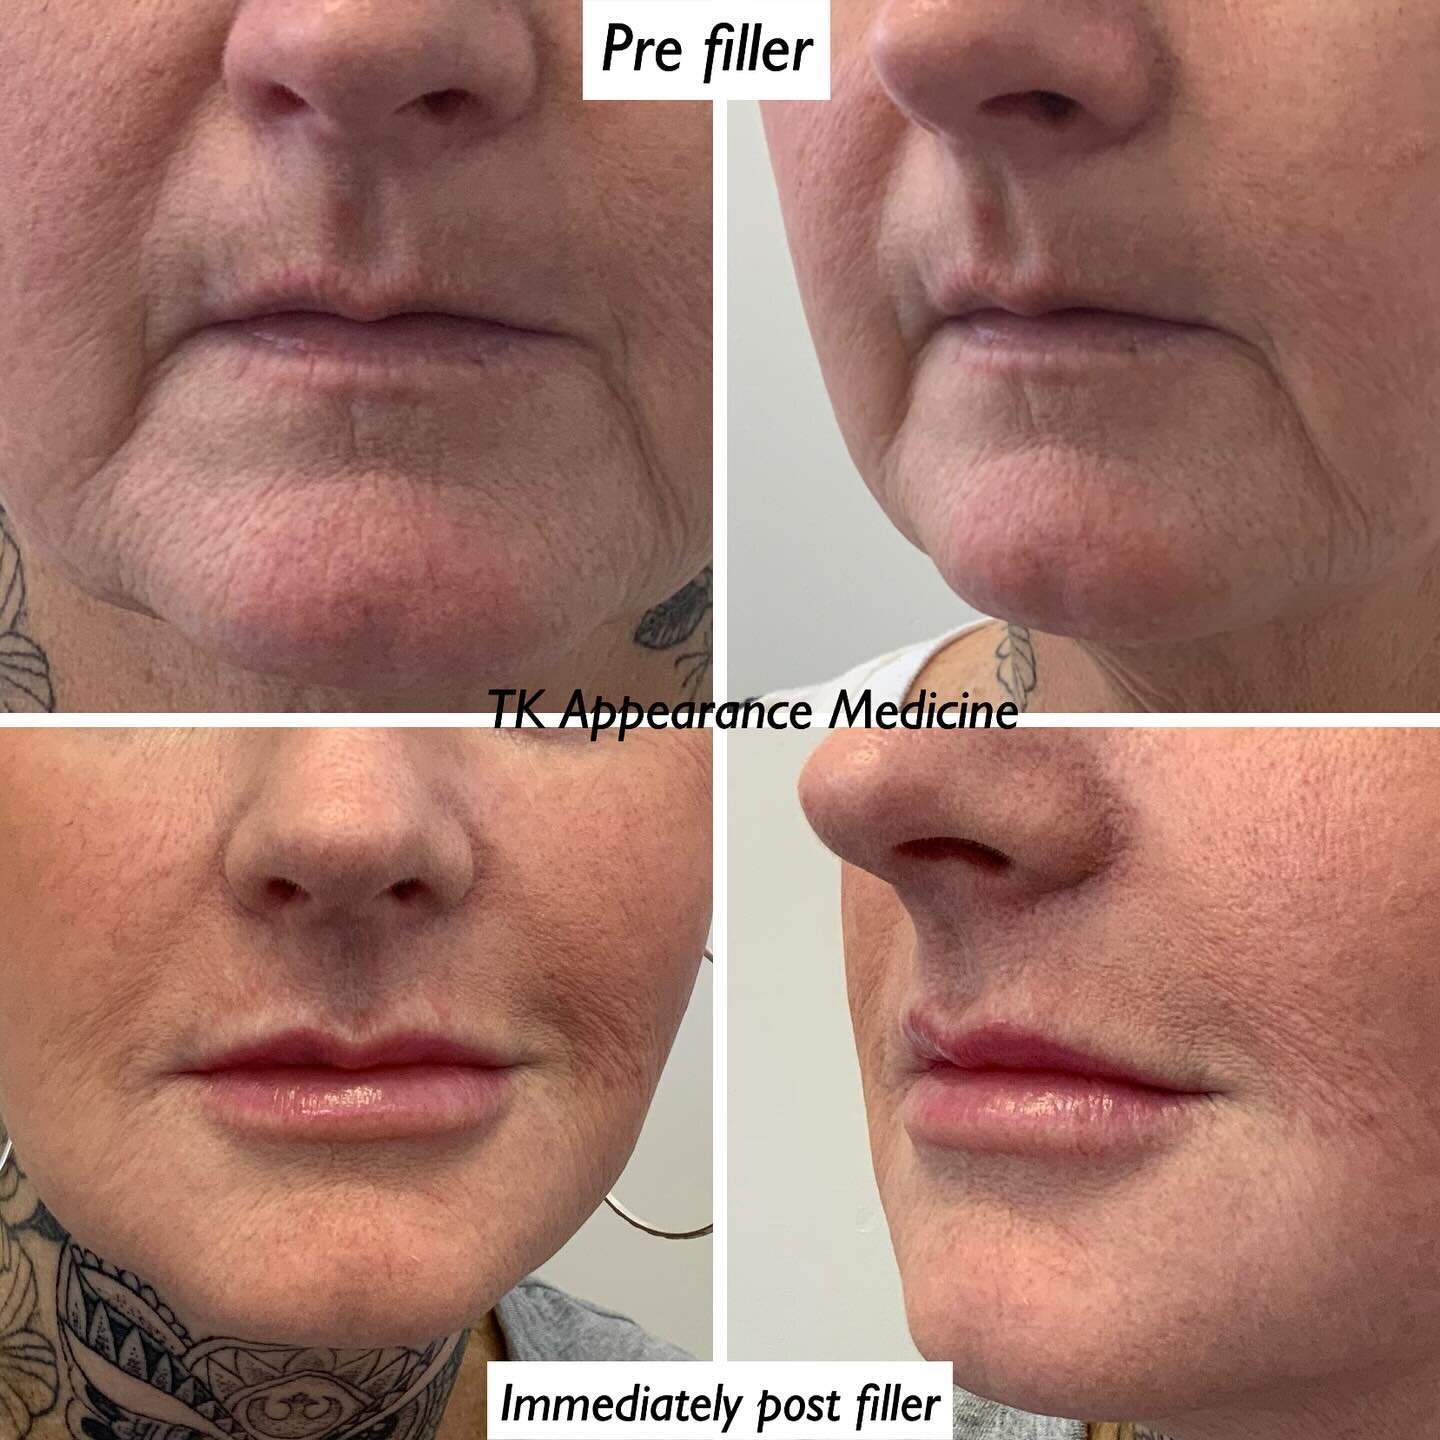 The tiniest of tweaks needed now for this 51 year old lady&hellip;. She gets more gorgeous every time I see her!  #regulartreatments #onceortwiceayear #tkappearancemedicinehamilton